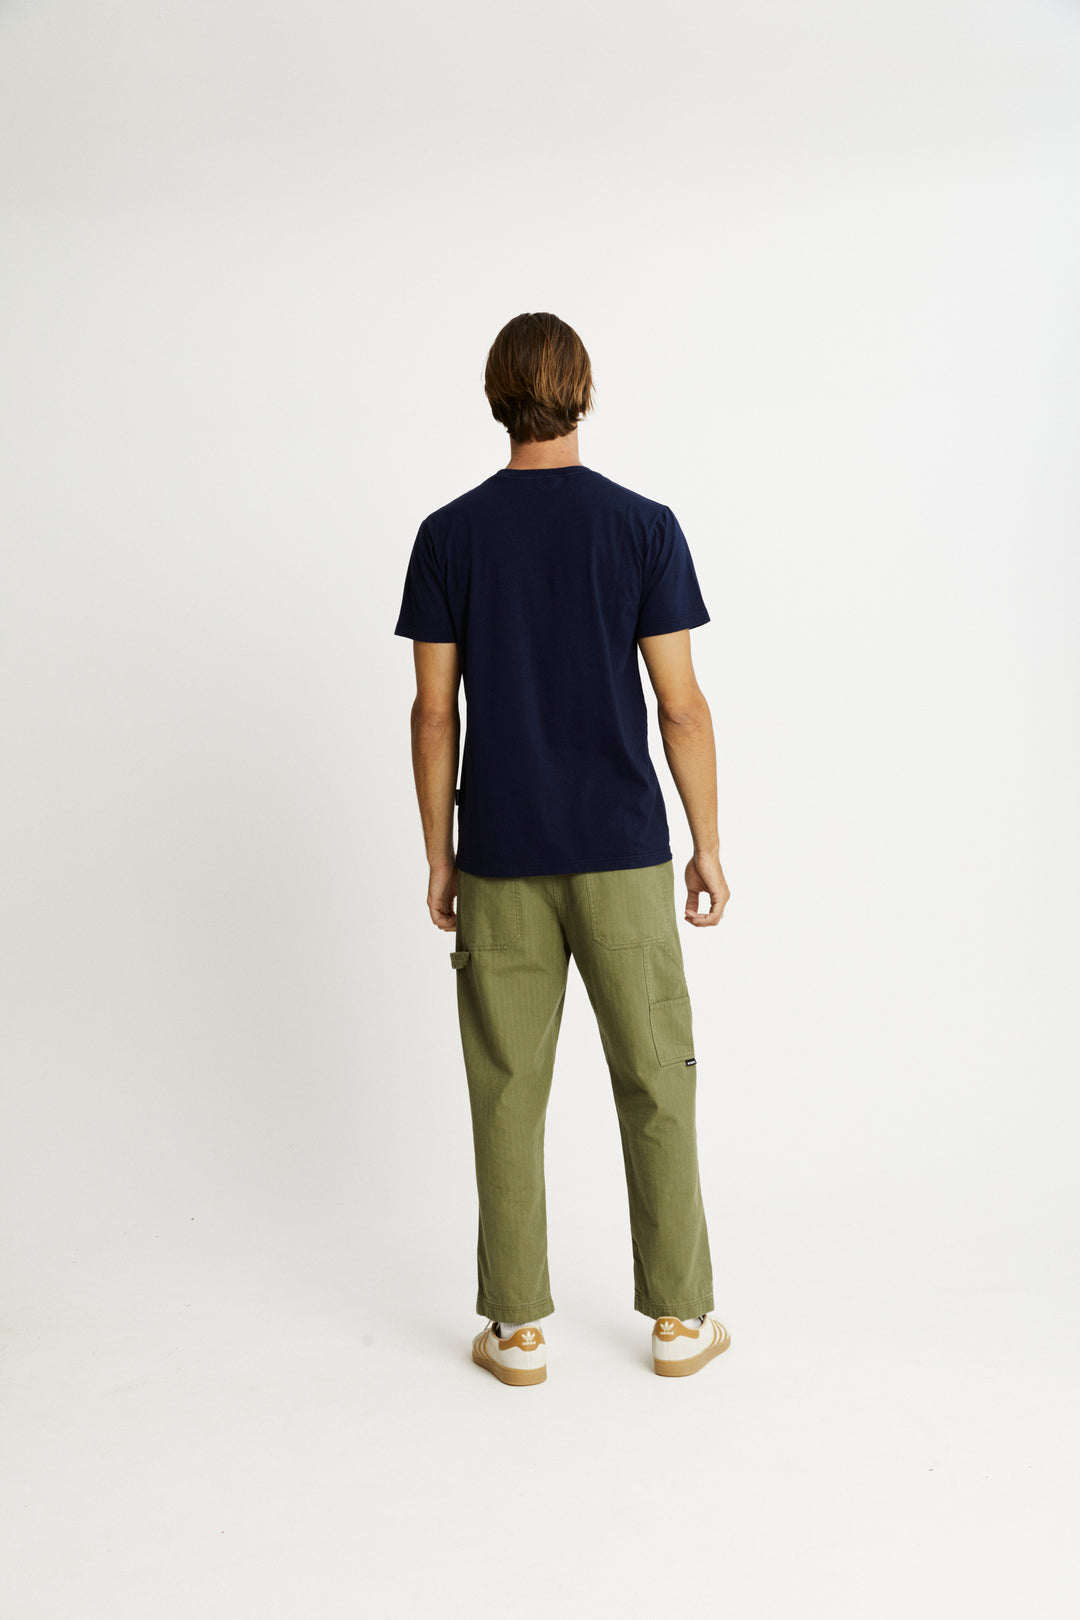 Mr Simple - Chapman Rosella Tee in Navy | Buster McGee Daylesford